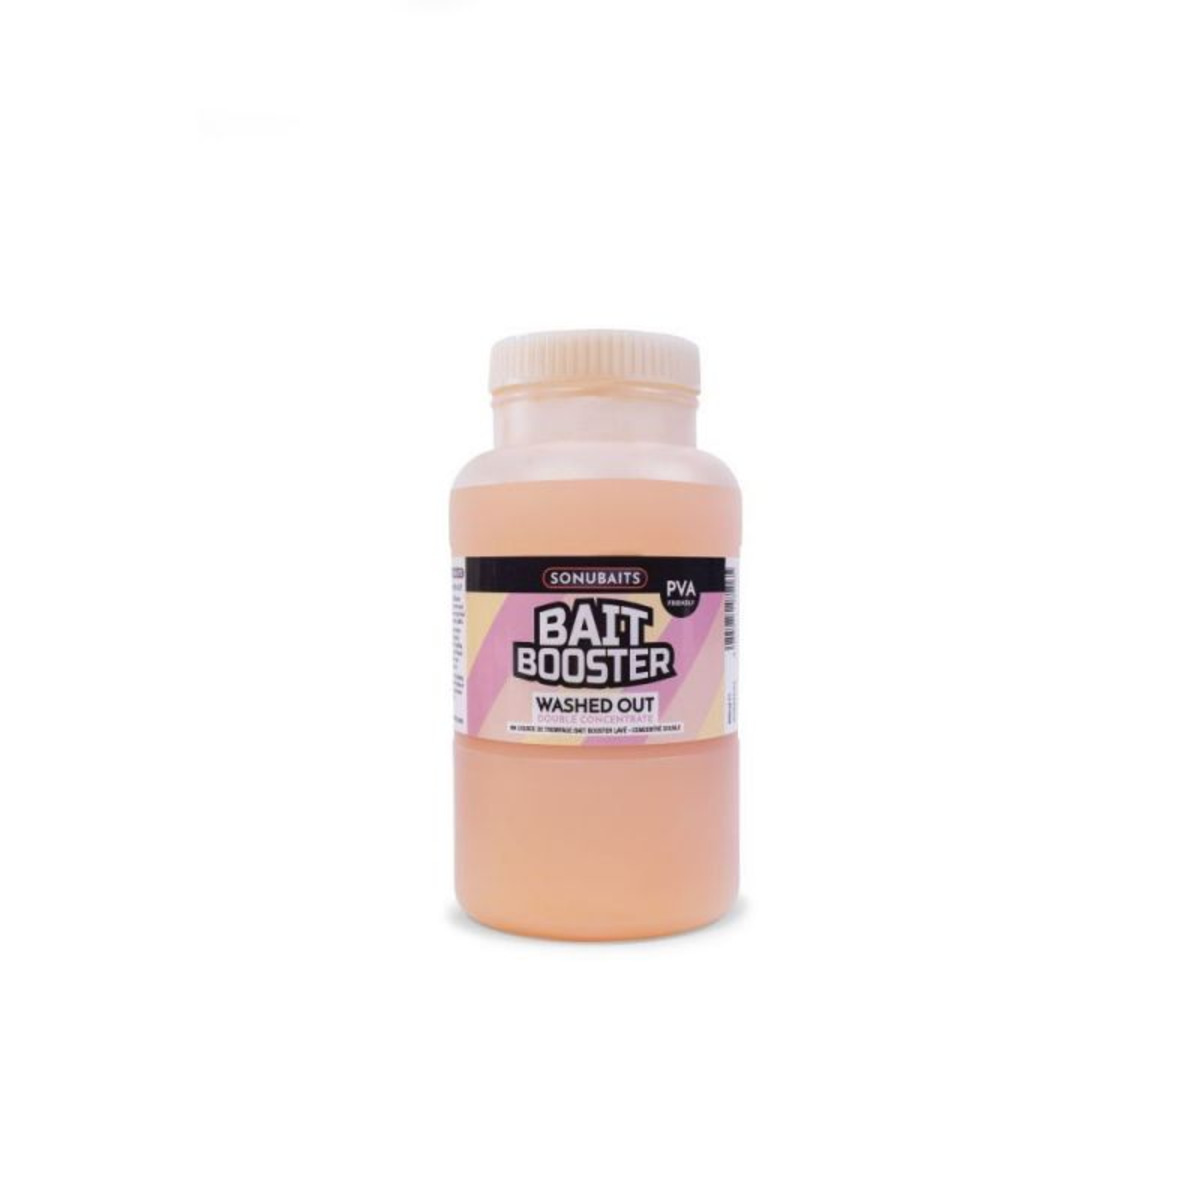 Sonubaits Bait Booster - Washed Out - 800 ml